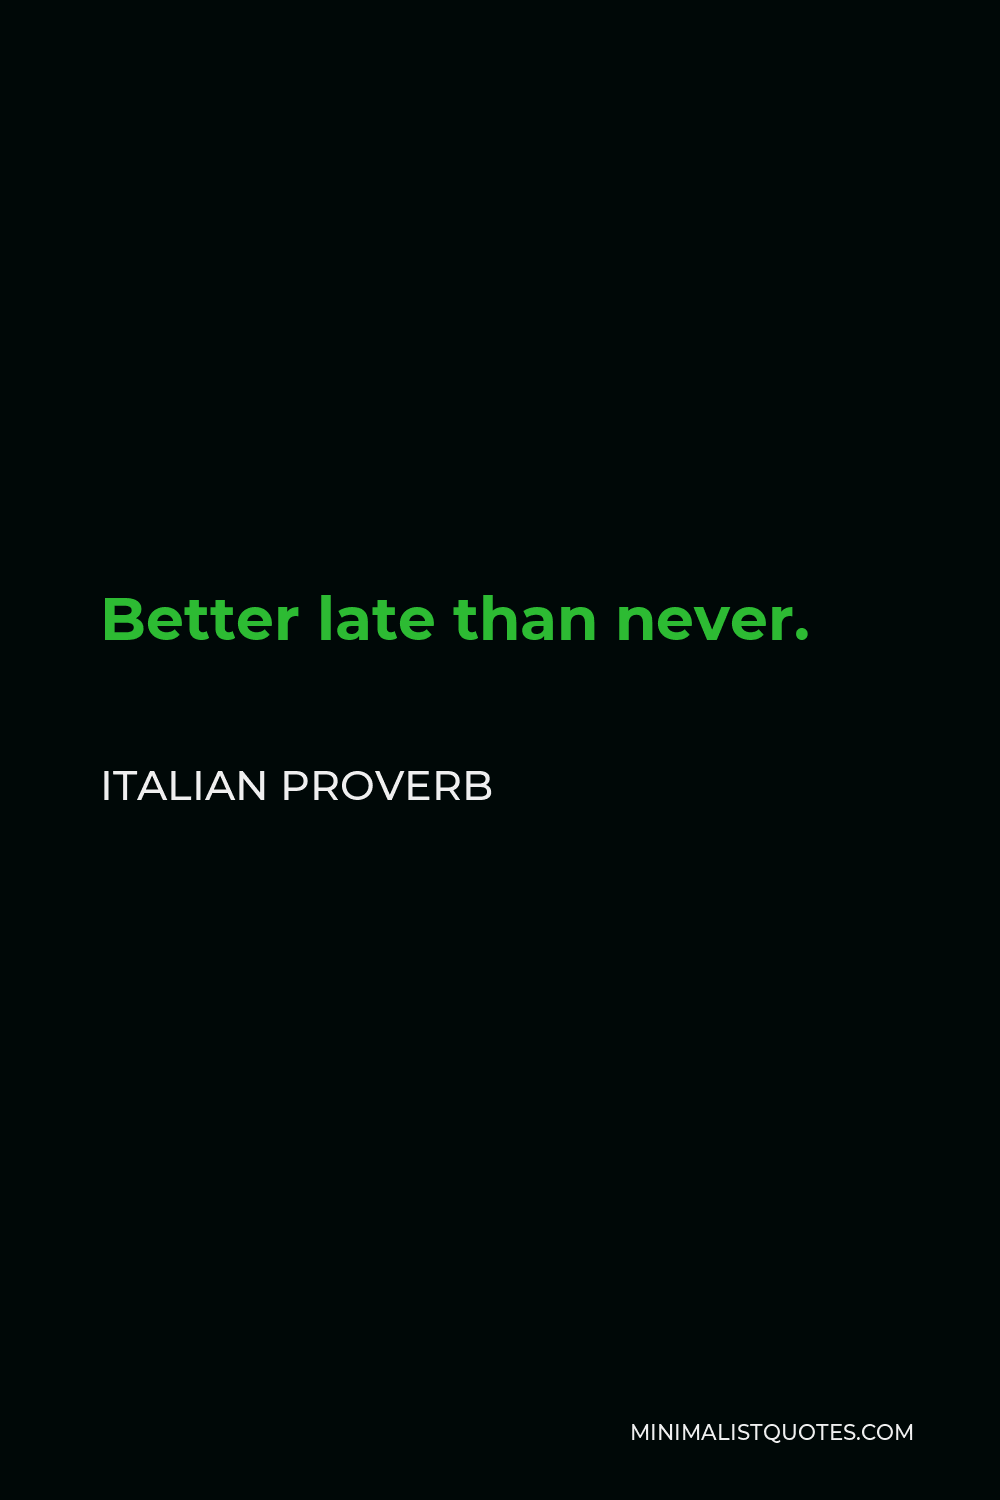 Italian Proverb Quote - Better late than never.